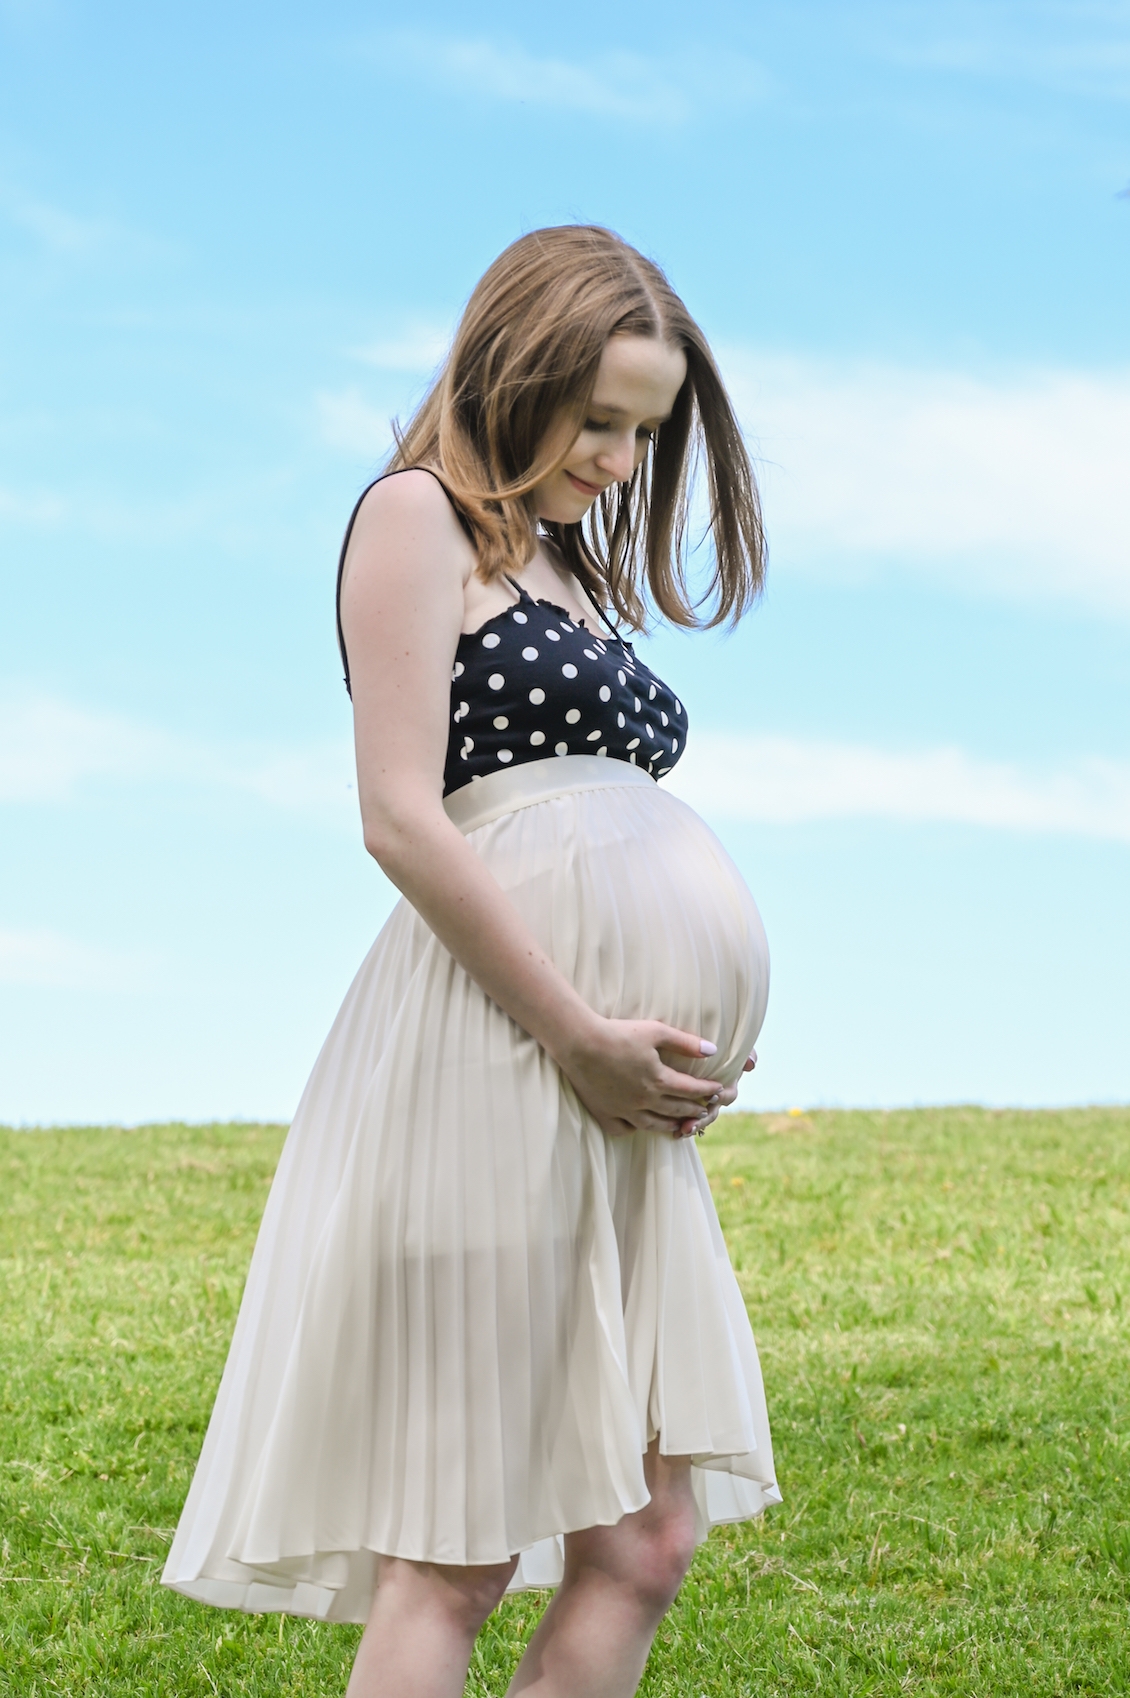 Maternity Photo At 33 Weeks Pregnant Life In Stepping Stones